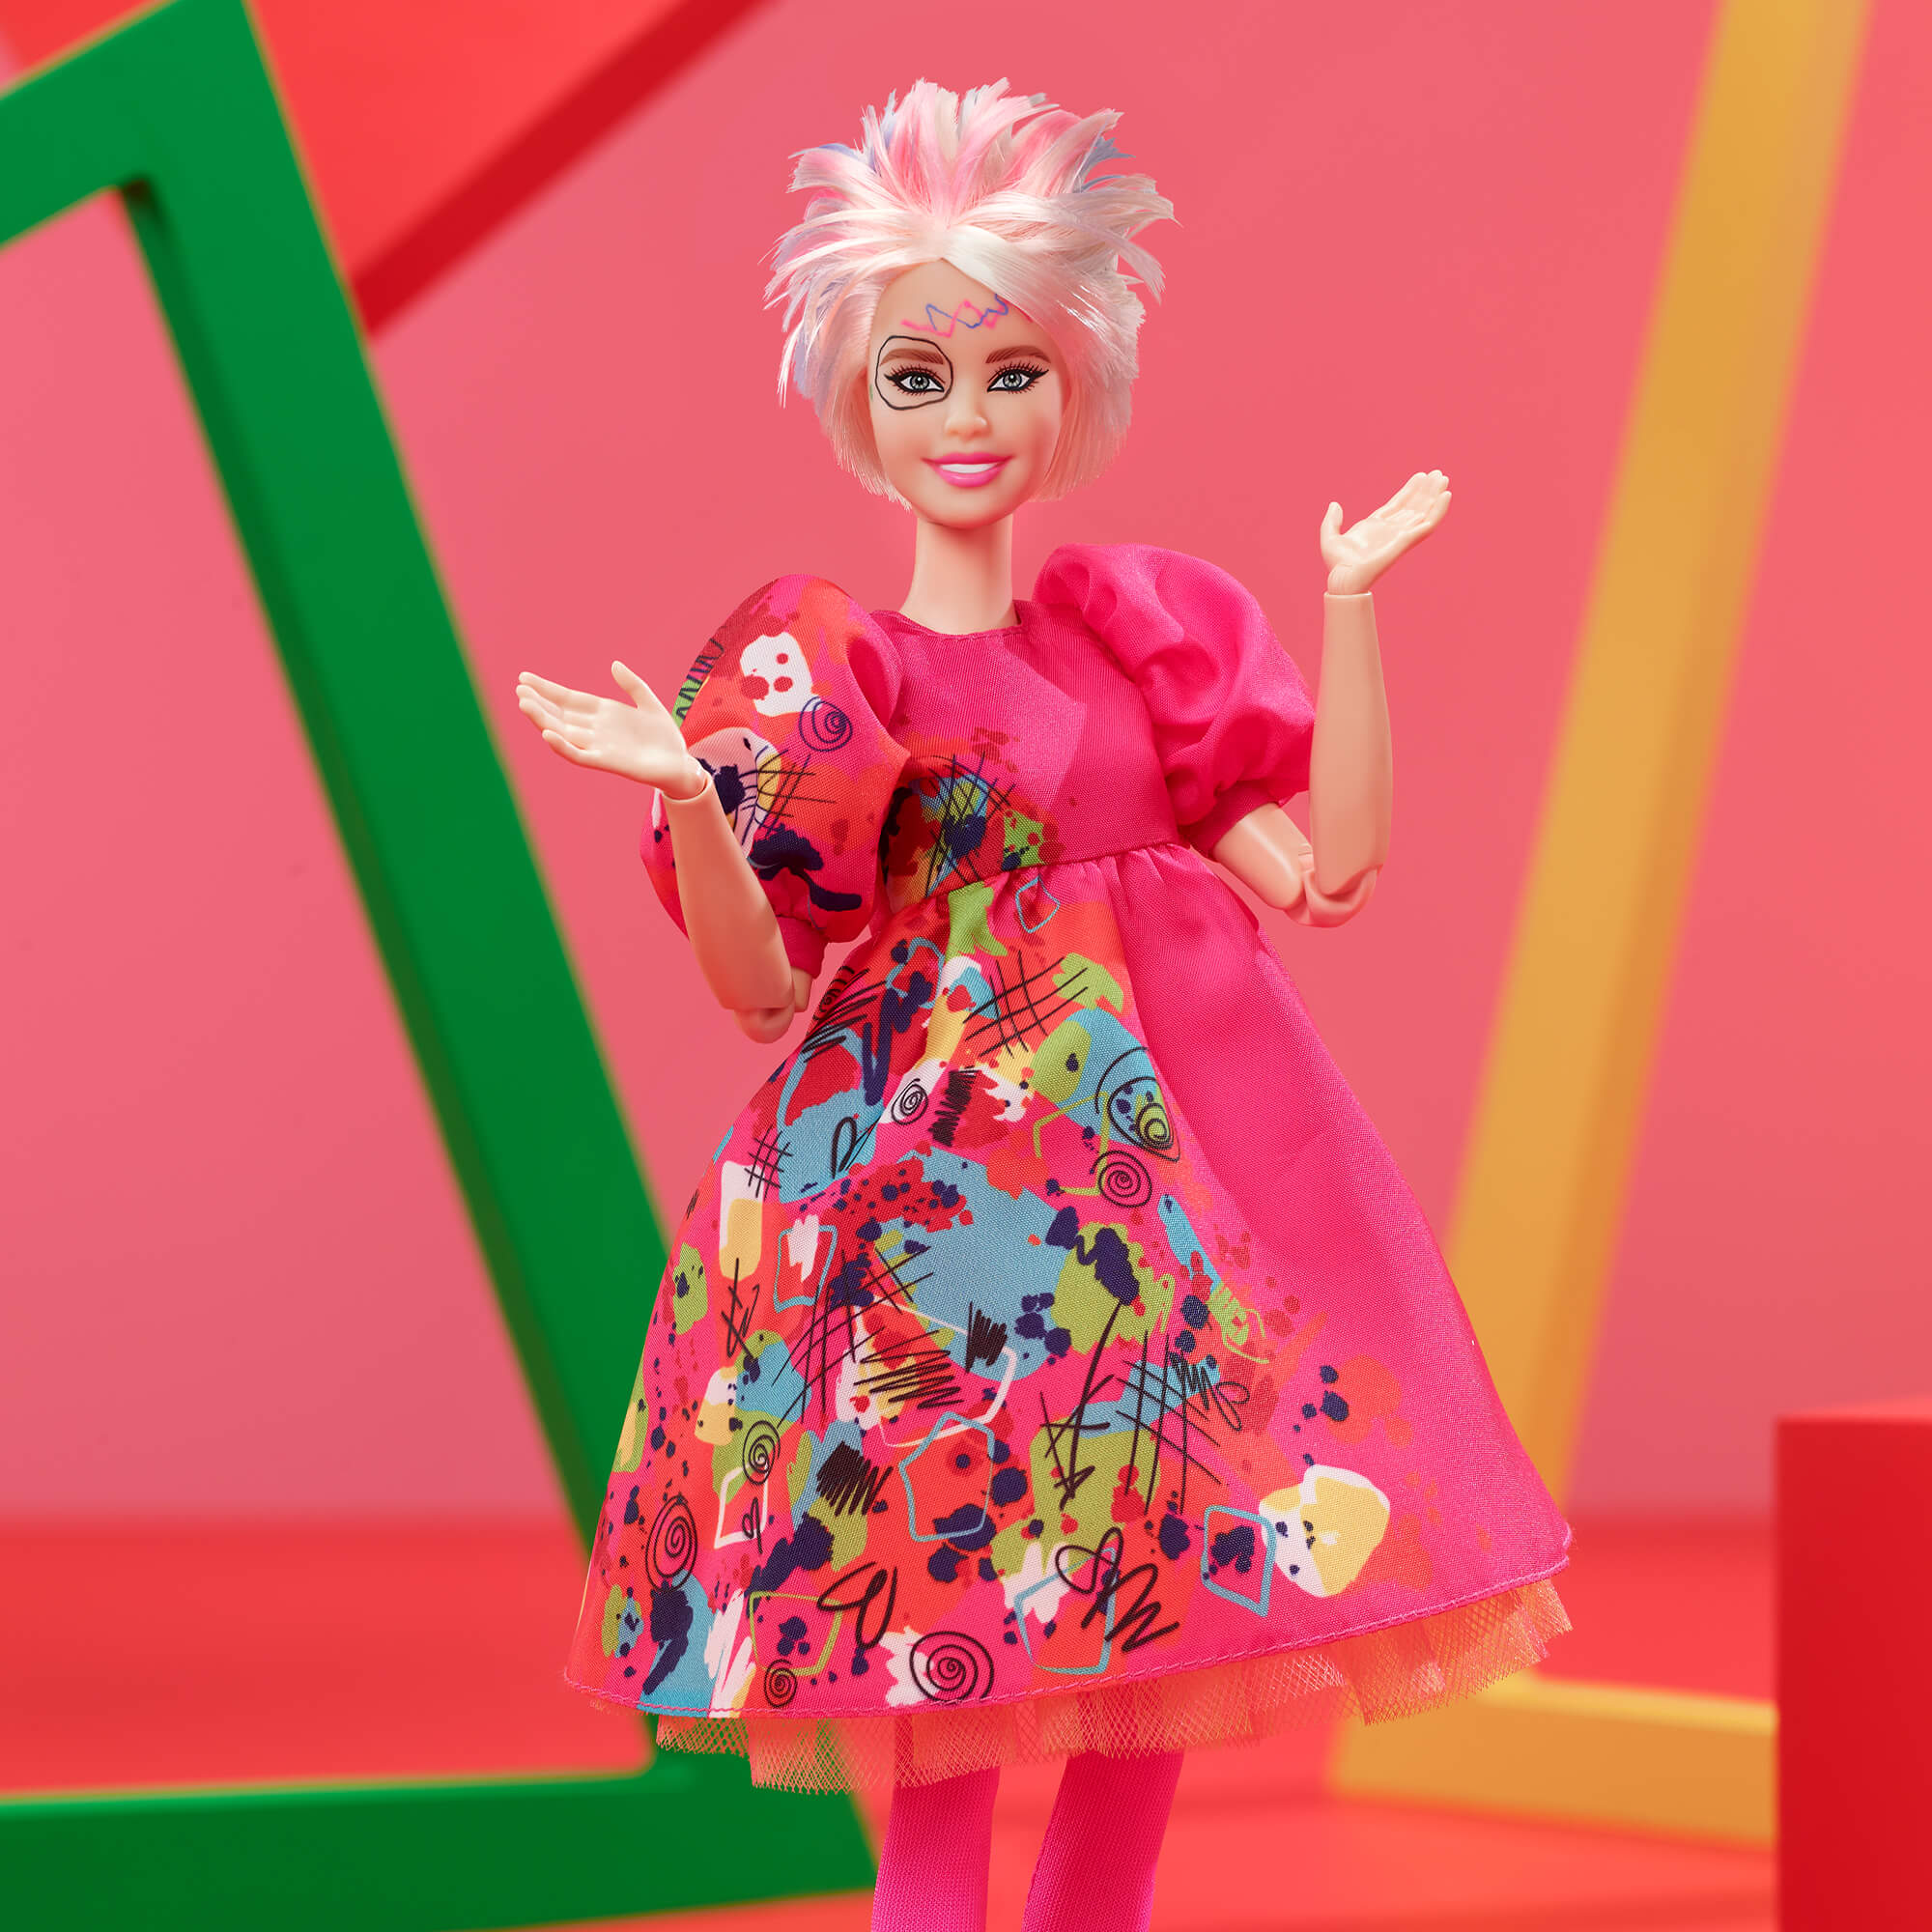 Here's How You Can Buy Your Own Weird Barbie Doll! - The Illuminerdi